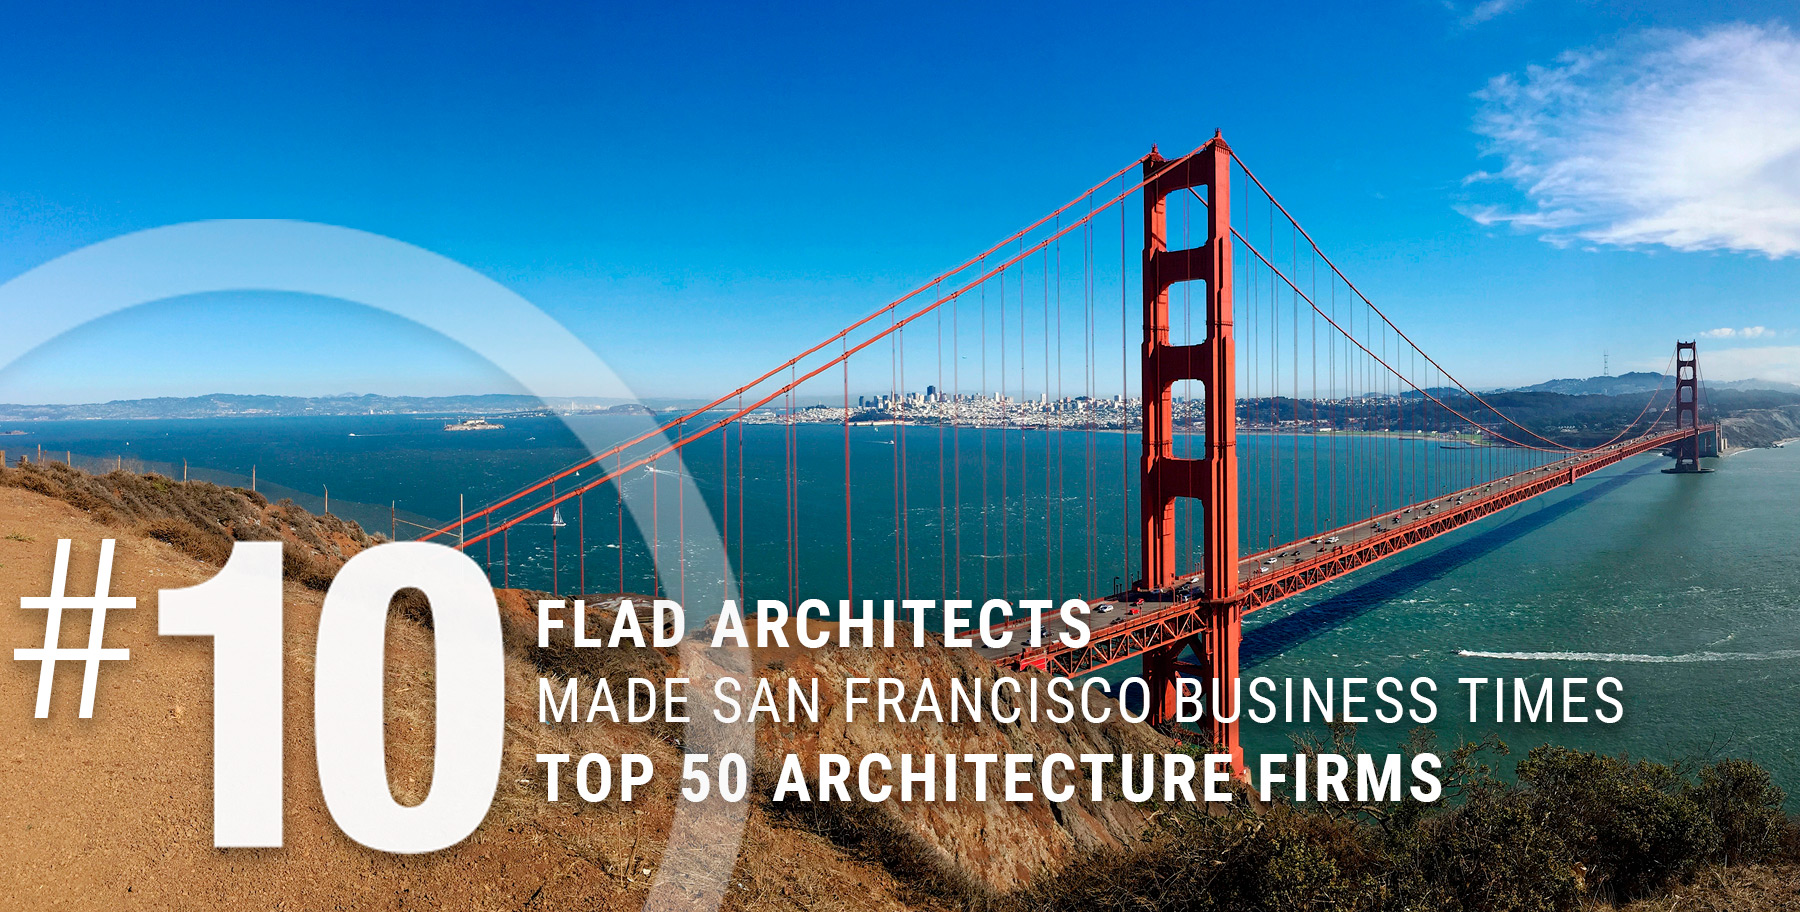 Flad Architects is Number 10 in San Francisco Business Times Top 50 Architecture Firms | Flad Architects